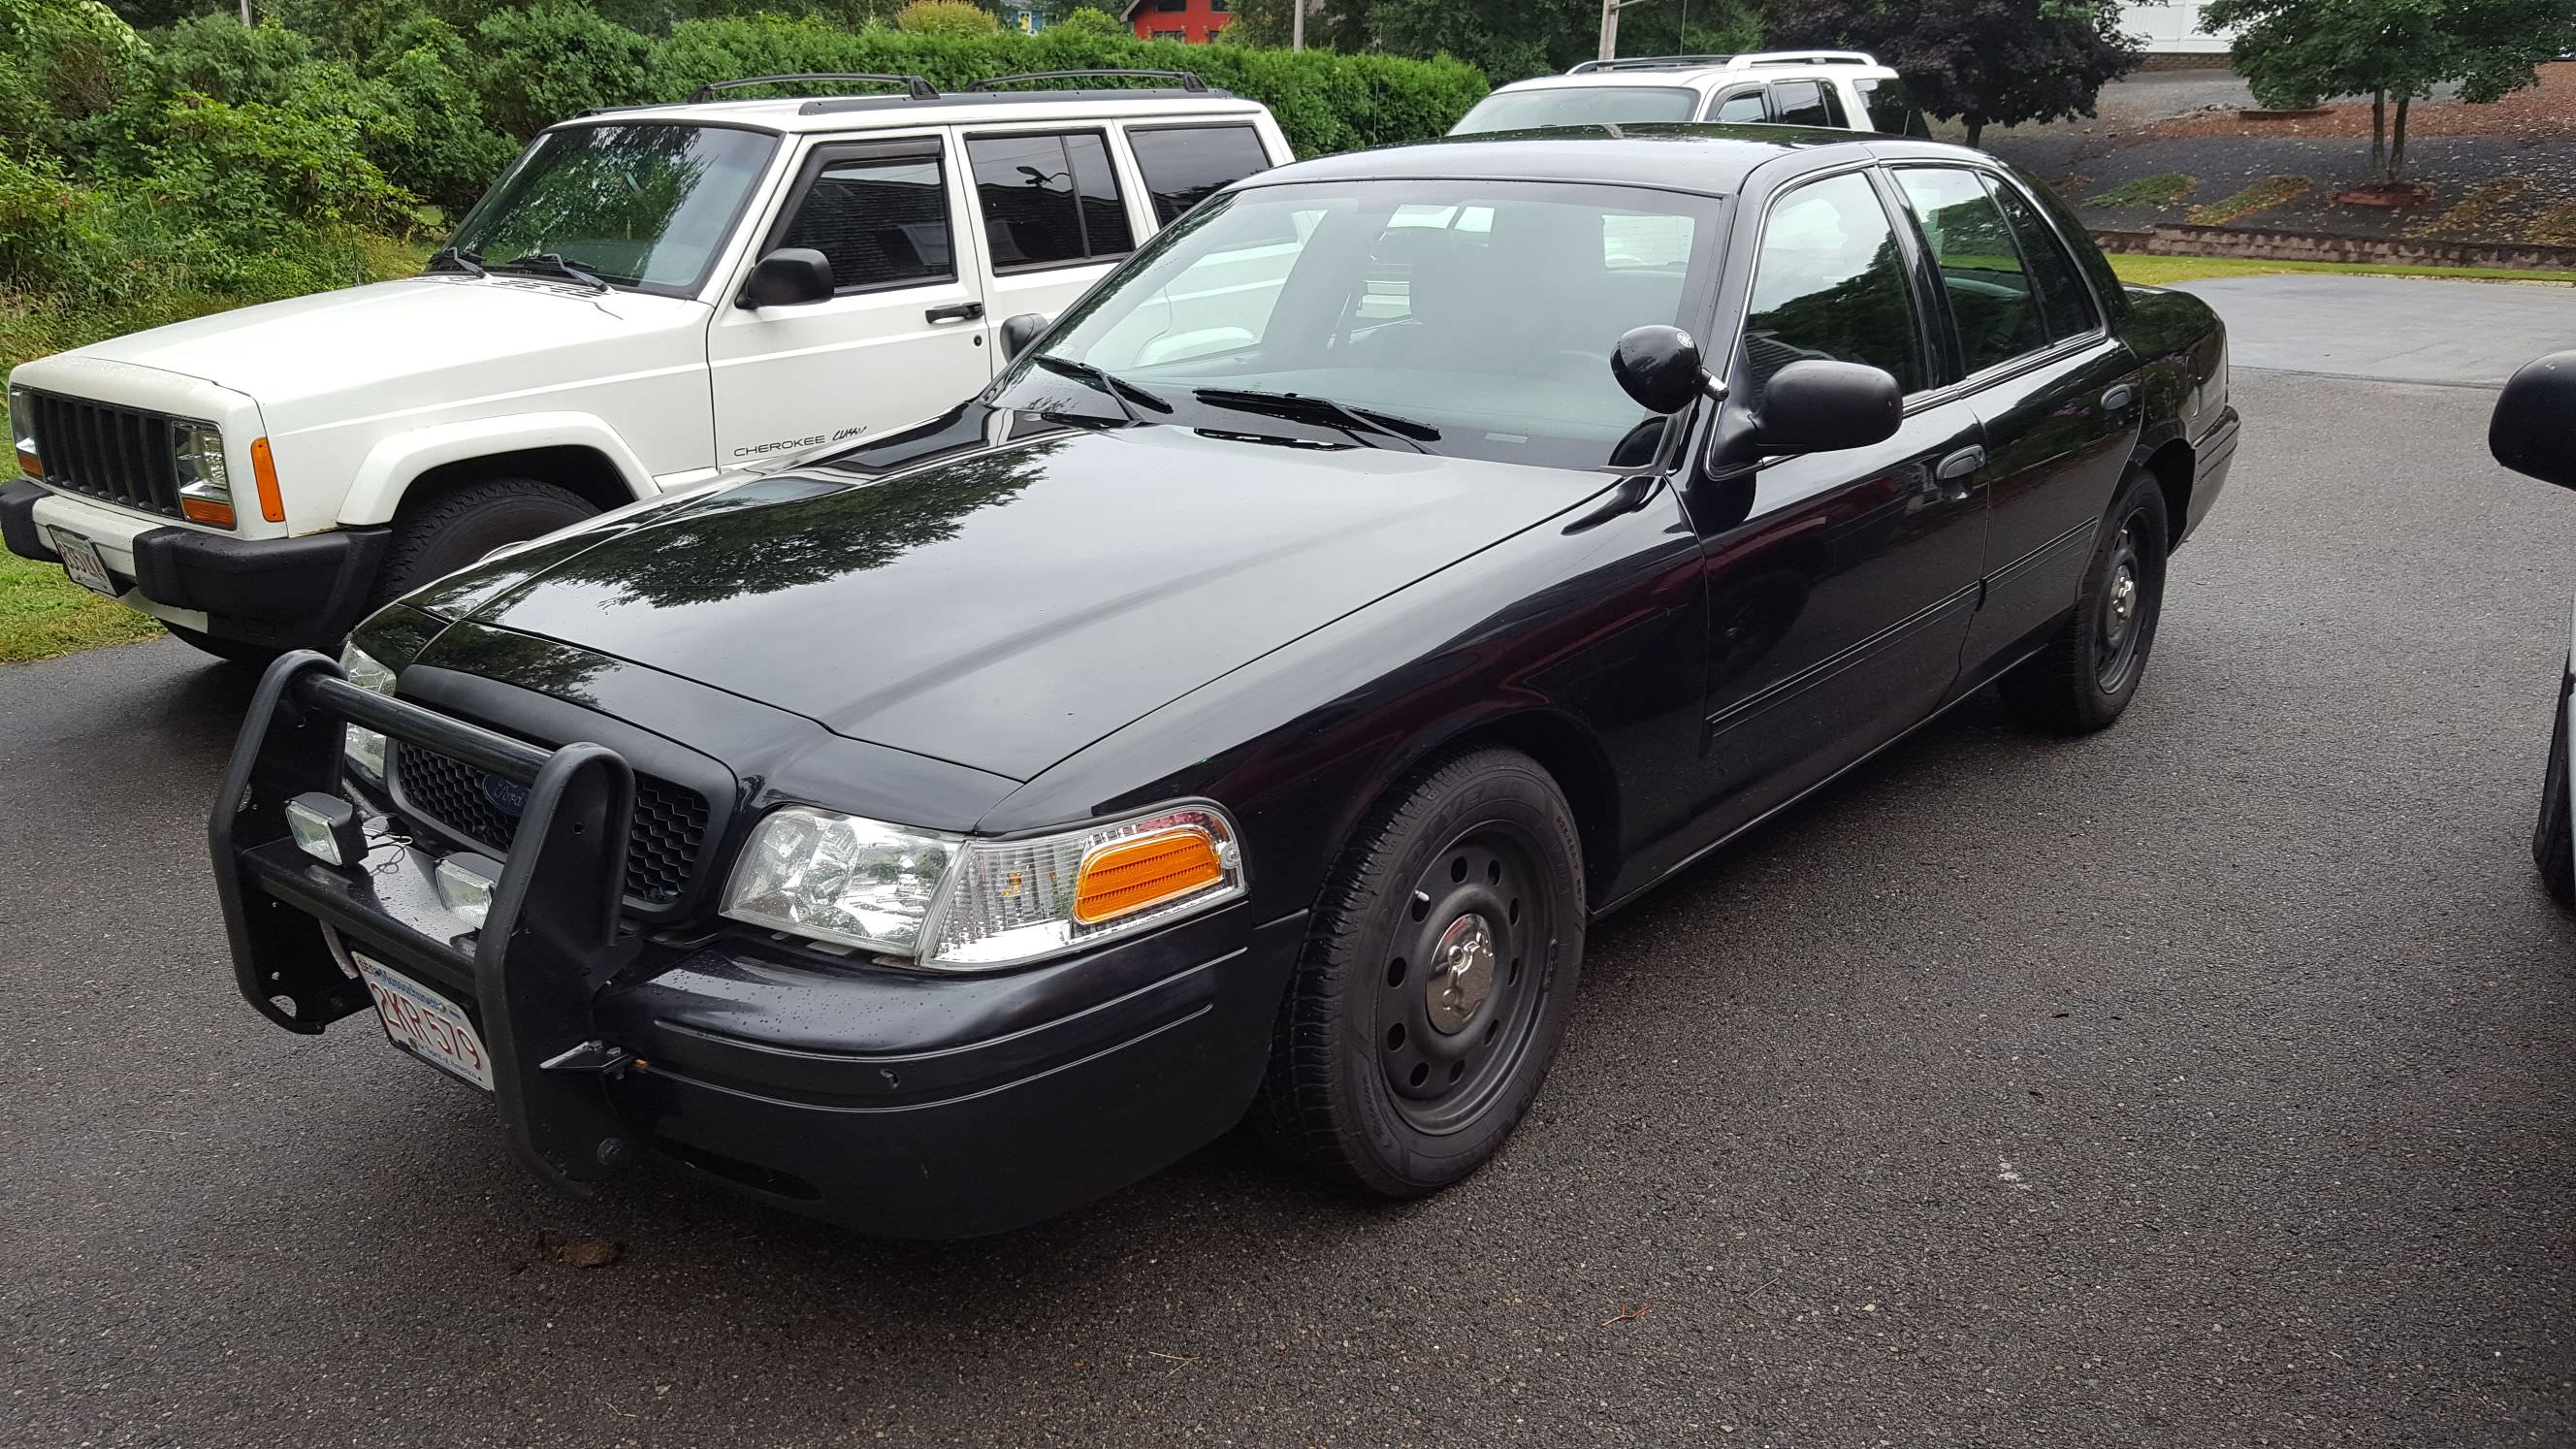 This particular Crown Vic was used by the New Hampshire State Police Depart...